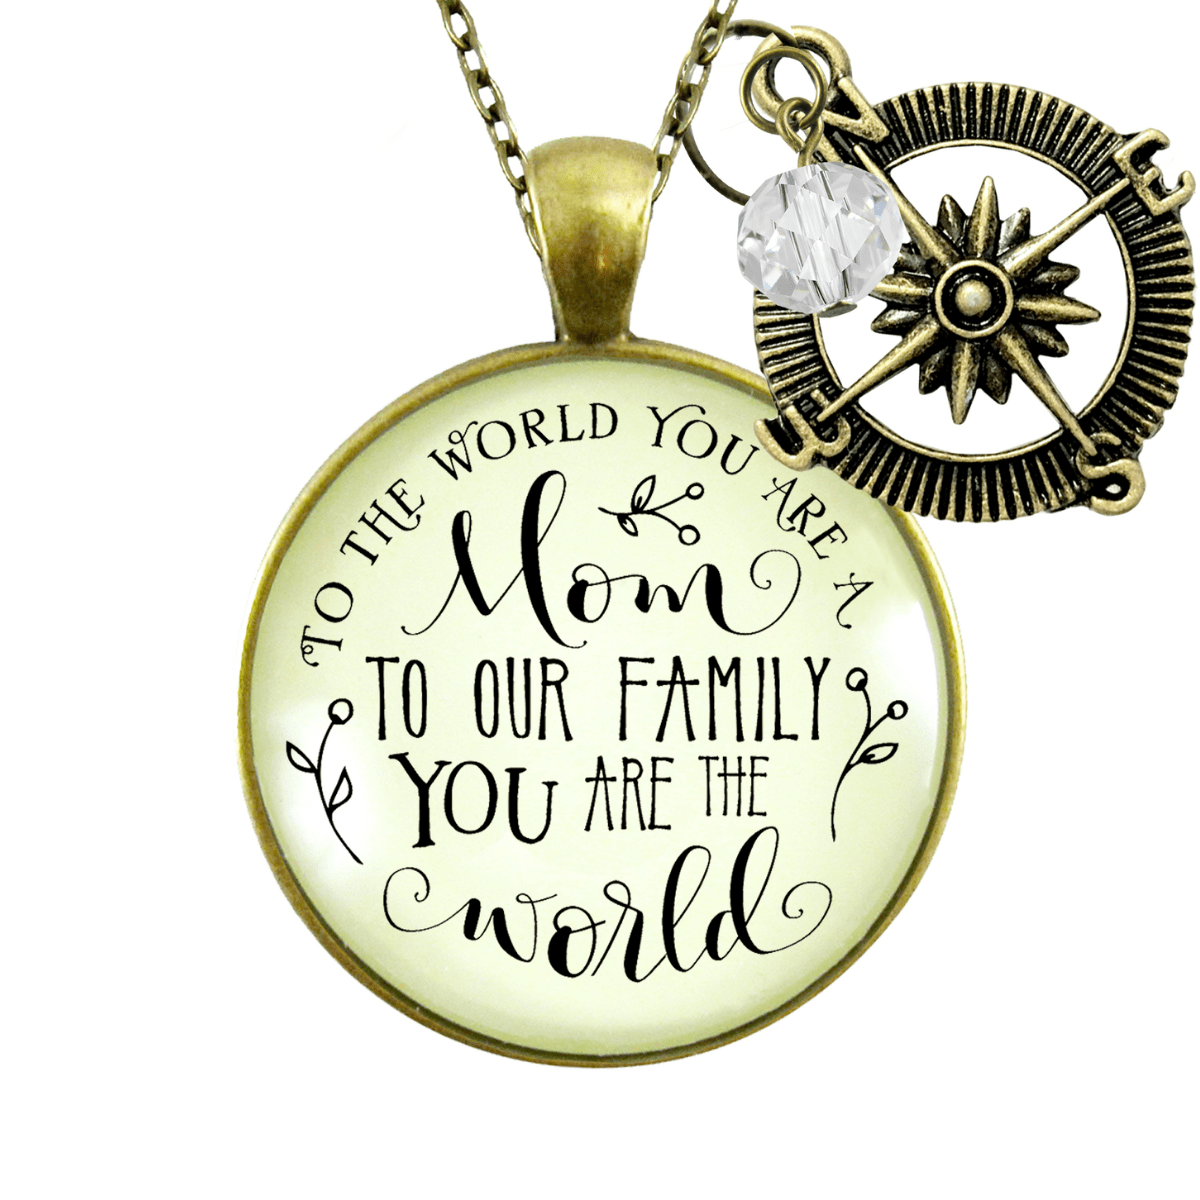 Gutsy Goodness Best Mom Necklace To the World You are Family Loves Gift Jewelry - Gutsy Goodness;Best Mom Necklace To The World You Are Family Loves Gift Jewelry - Gutsy Goodness Handmade Jewelry Gifts